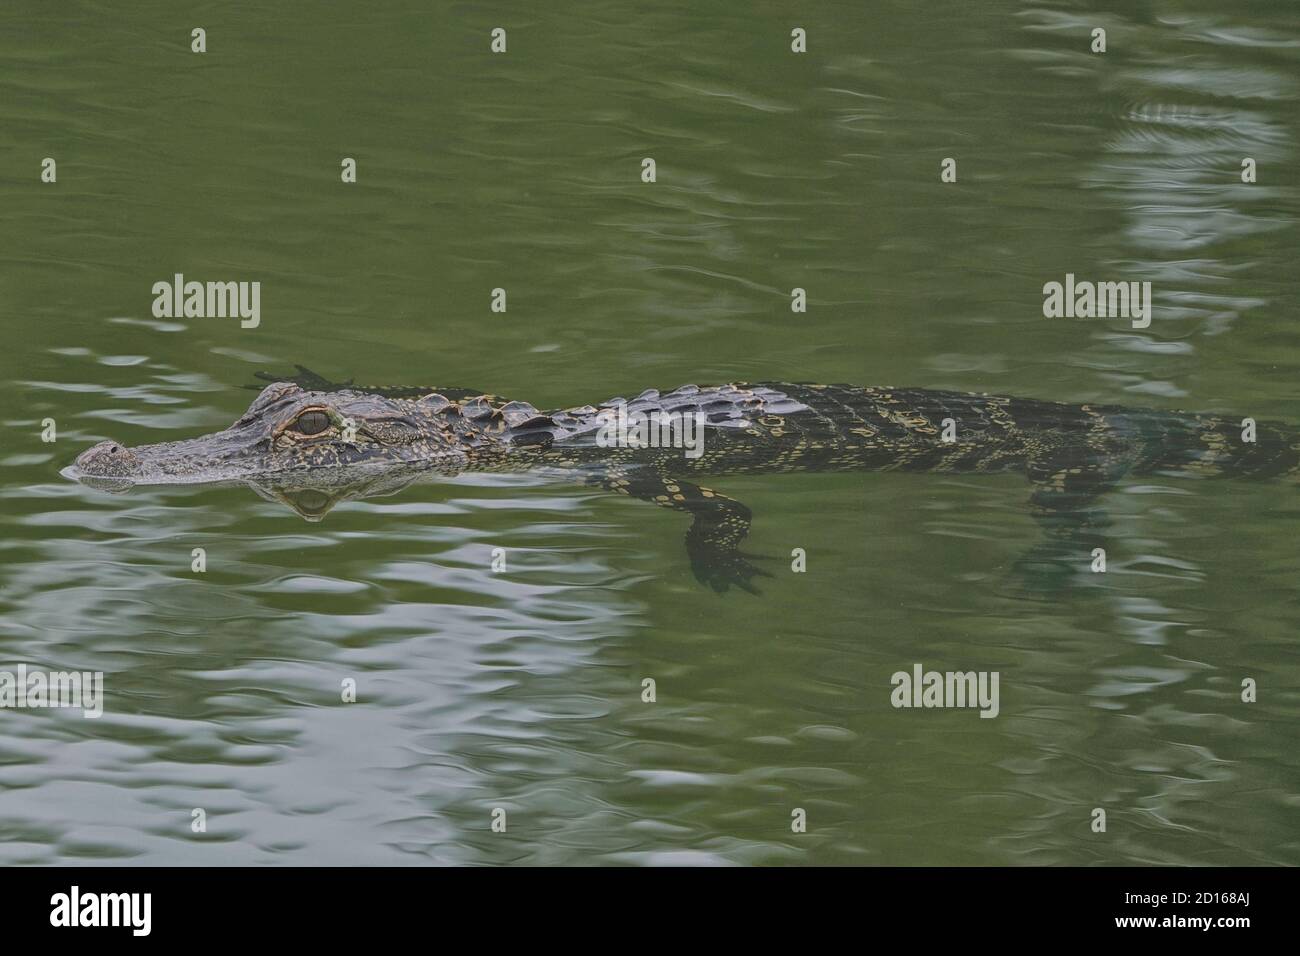 American alligator, Alligator mississippiensis , swimming in a residential area. Stock Photo